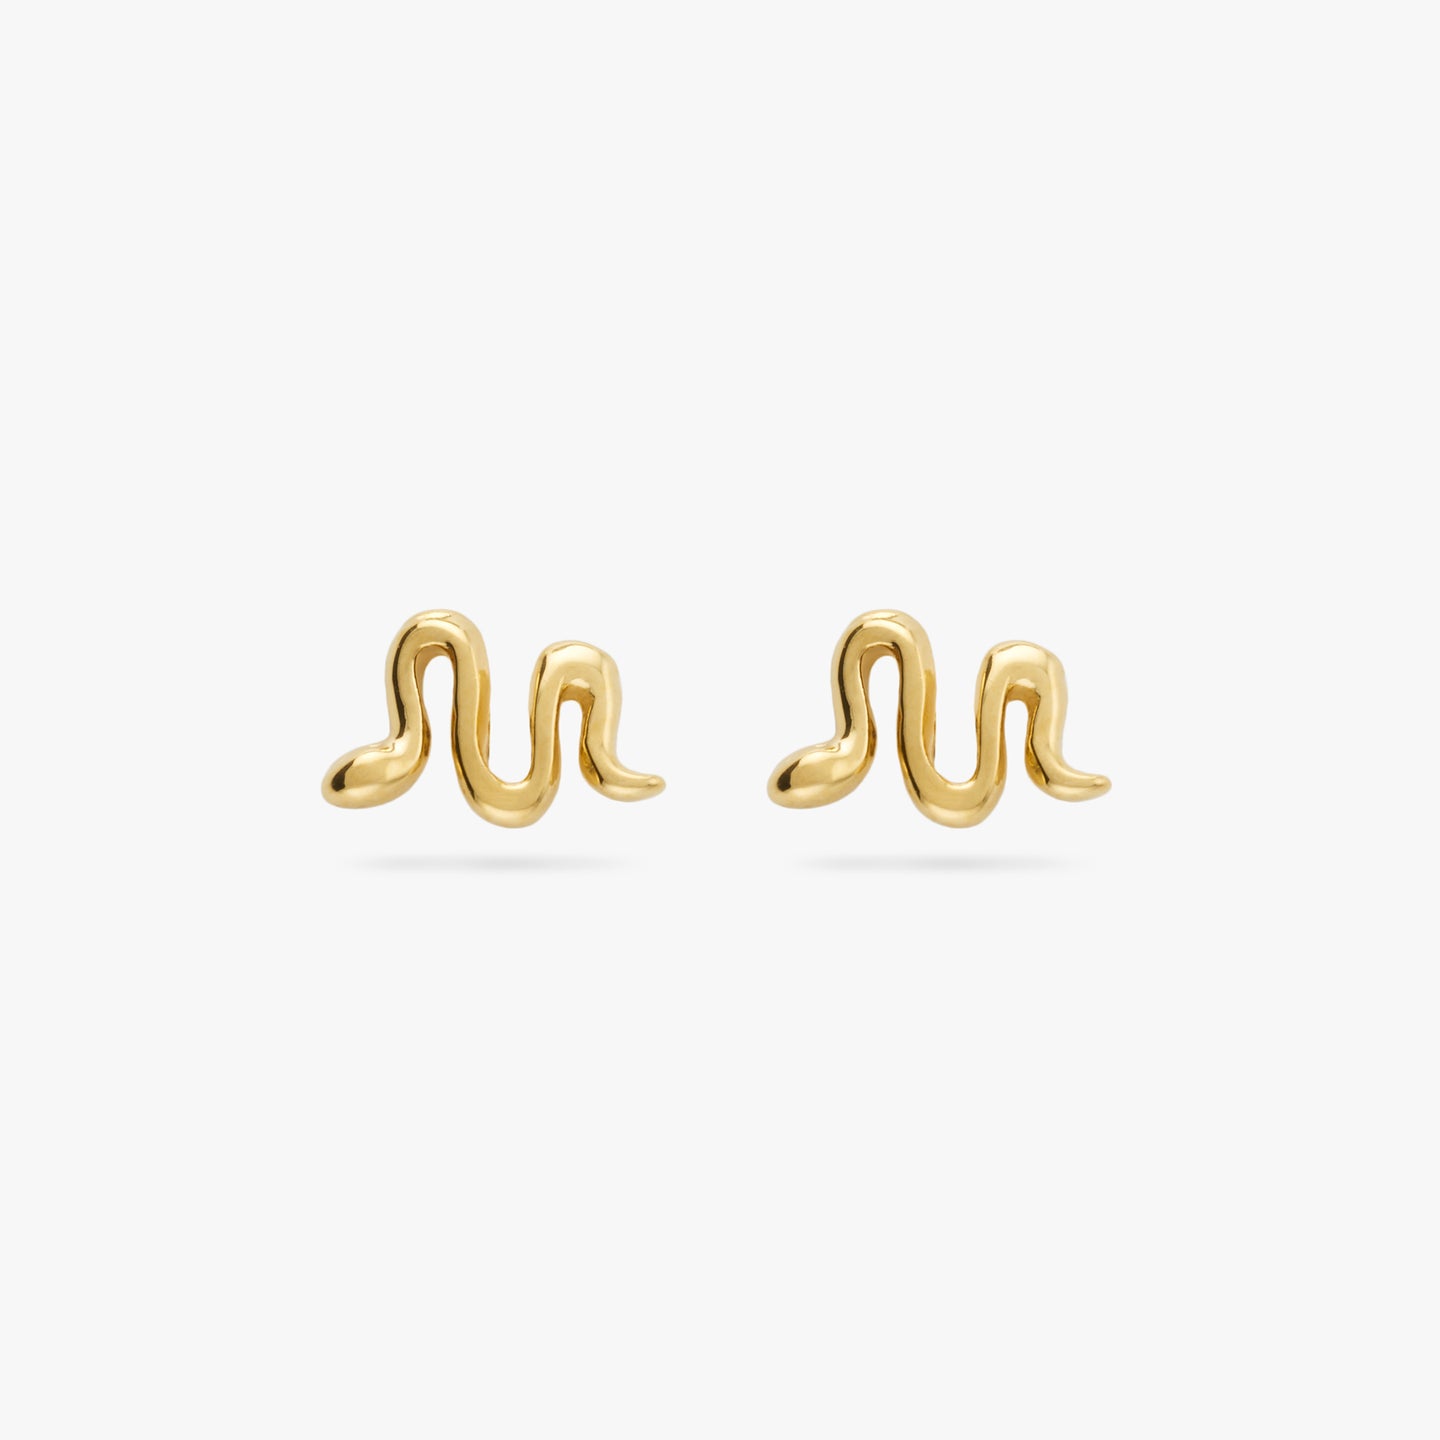 This is a pair of small gold studs in the shape of a snakes [pair] color:null|gold